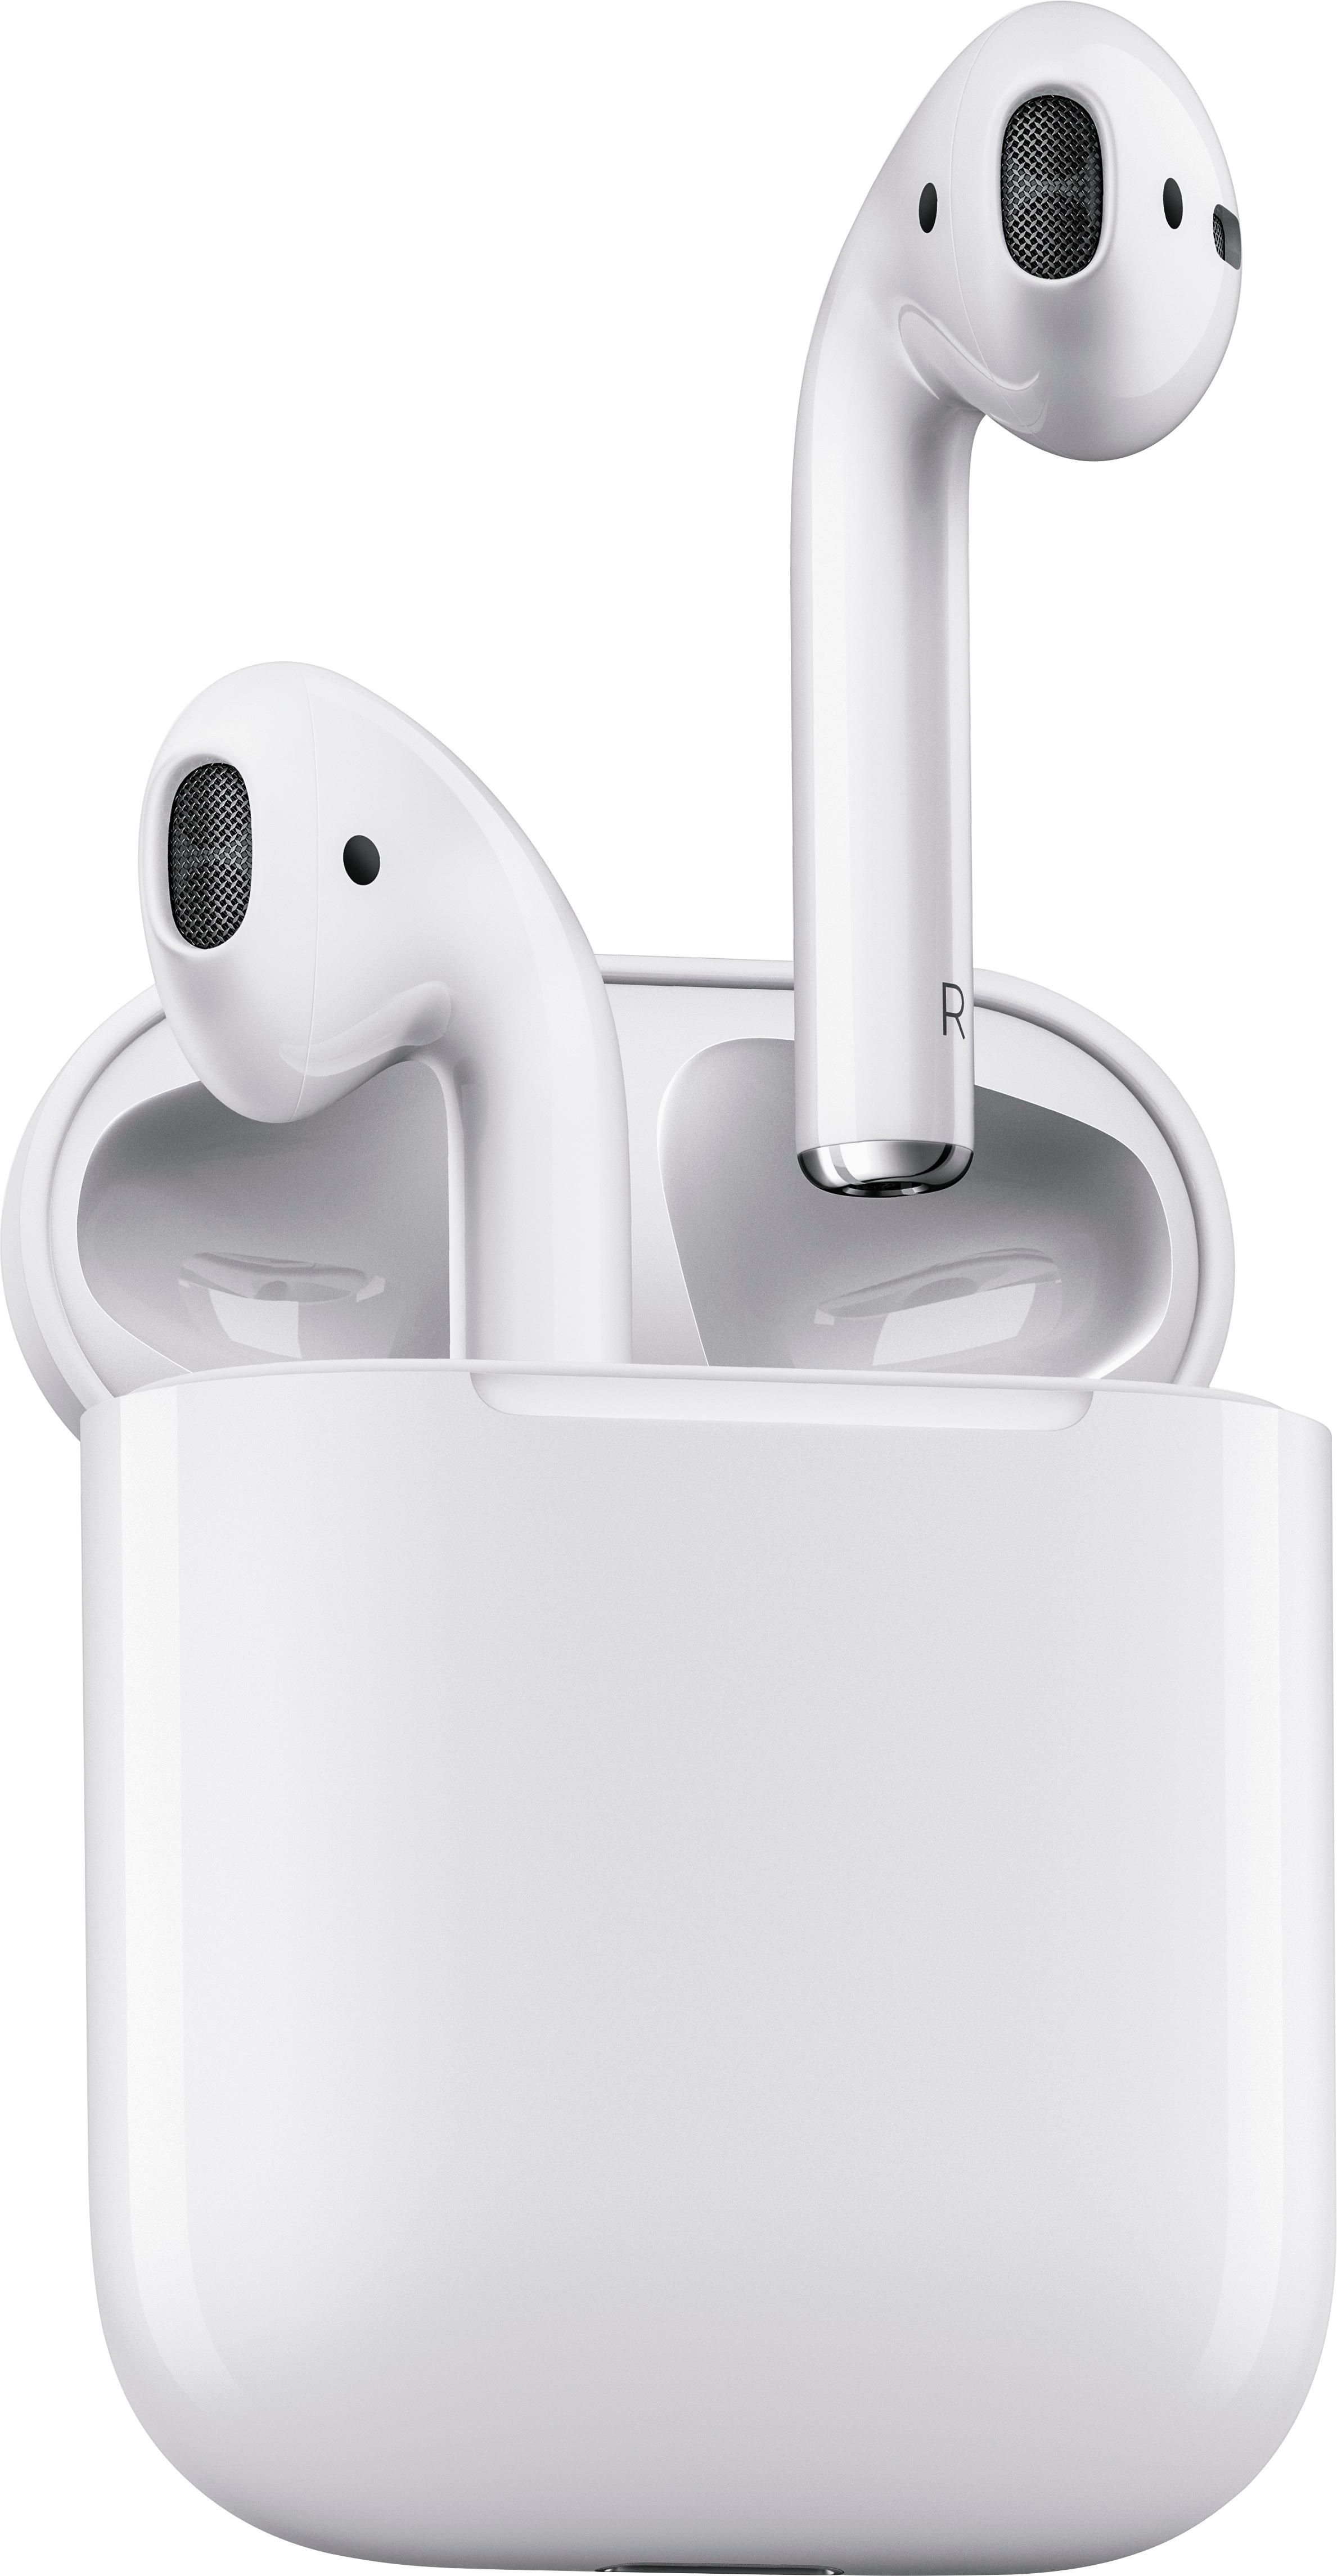 Apple - Geek Squad Certified Refurbished AirPods with Charging Case (1st Generation) - White | Best Buy U.S.